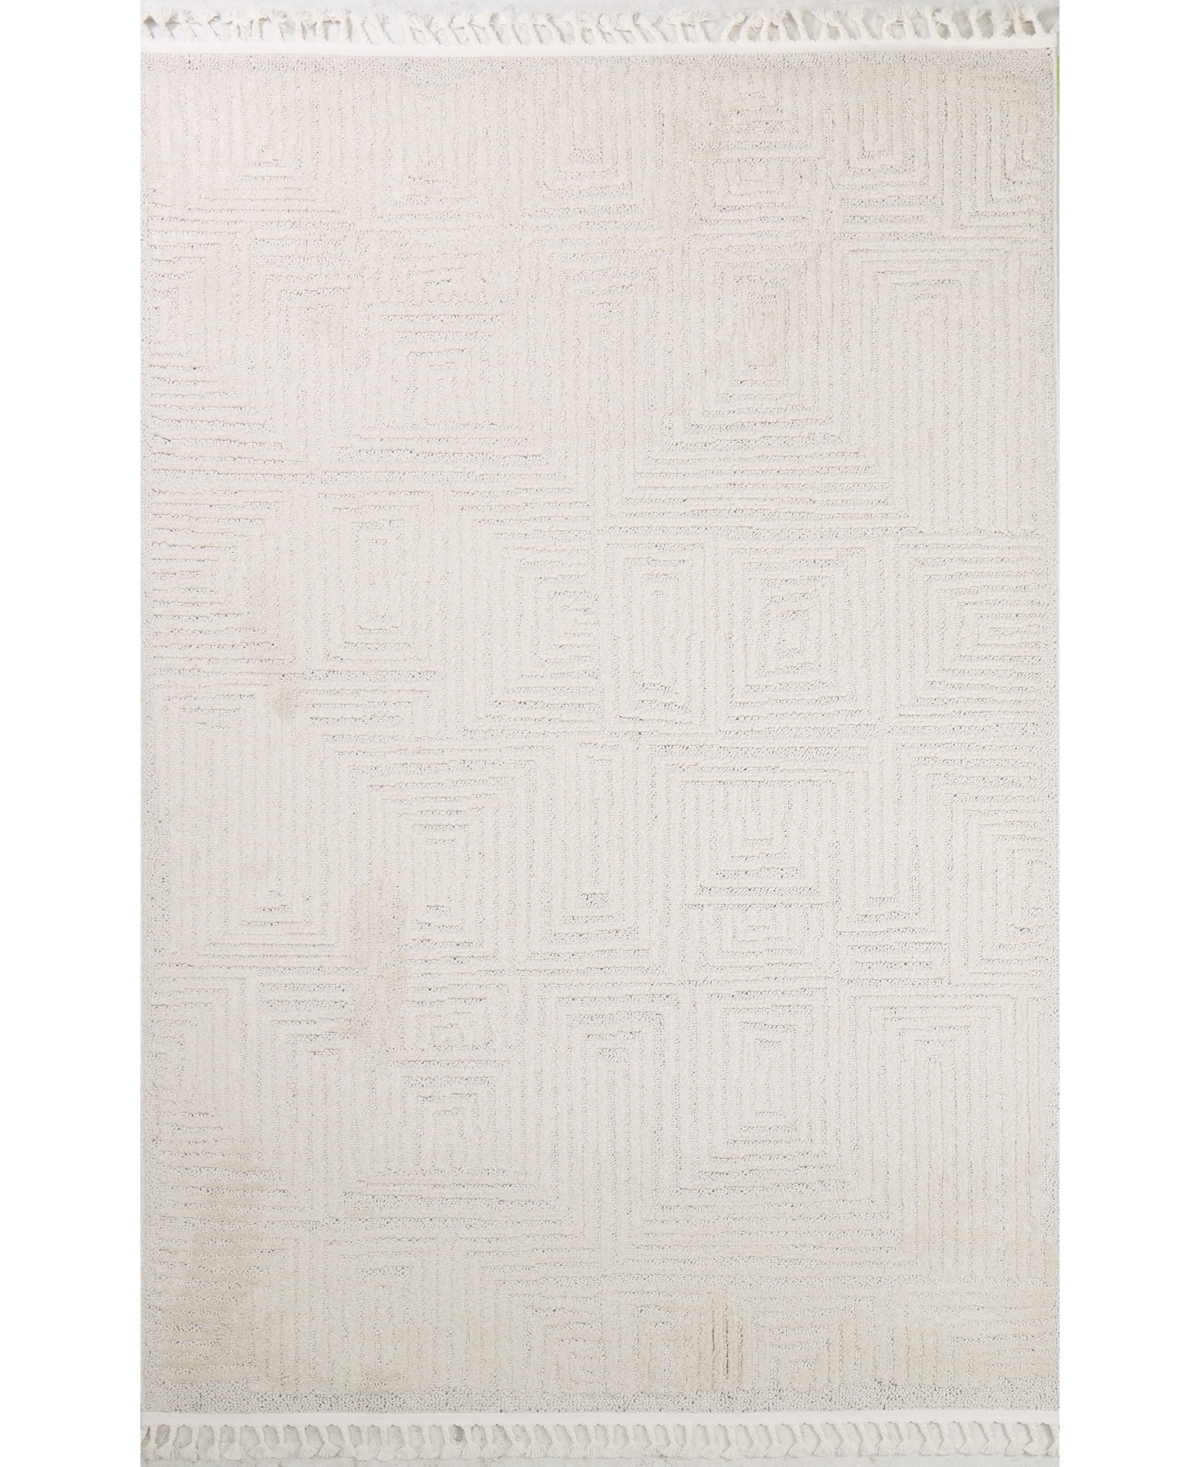 Bb Rugs Wainscott WST205 8'7in x 11'6in Area Rug - Ivory